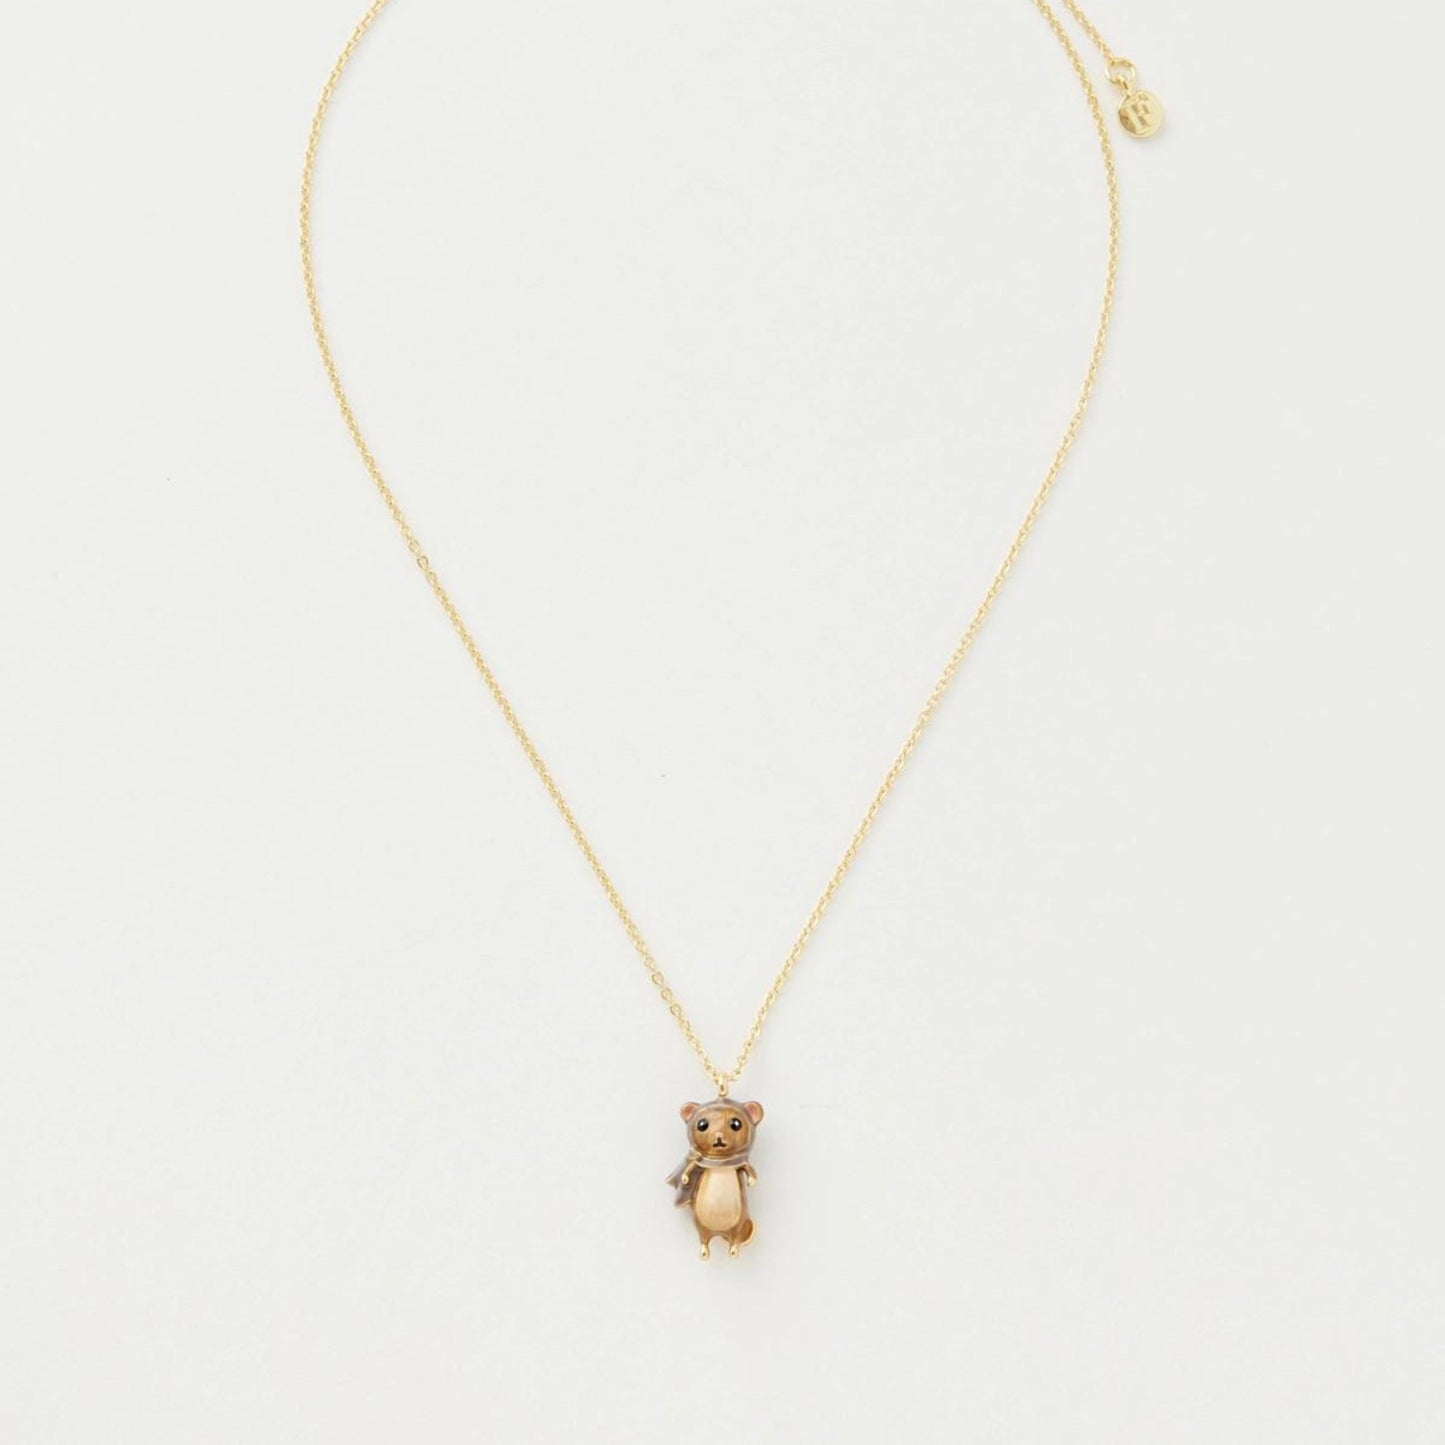 Enamel Ralph Mouse Necklace - The Little Jewellery Company